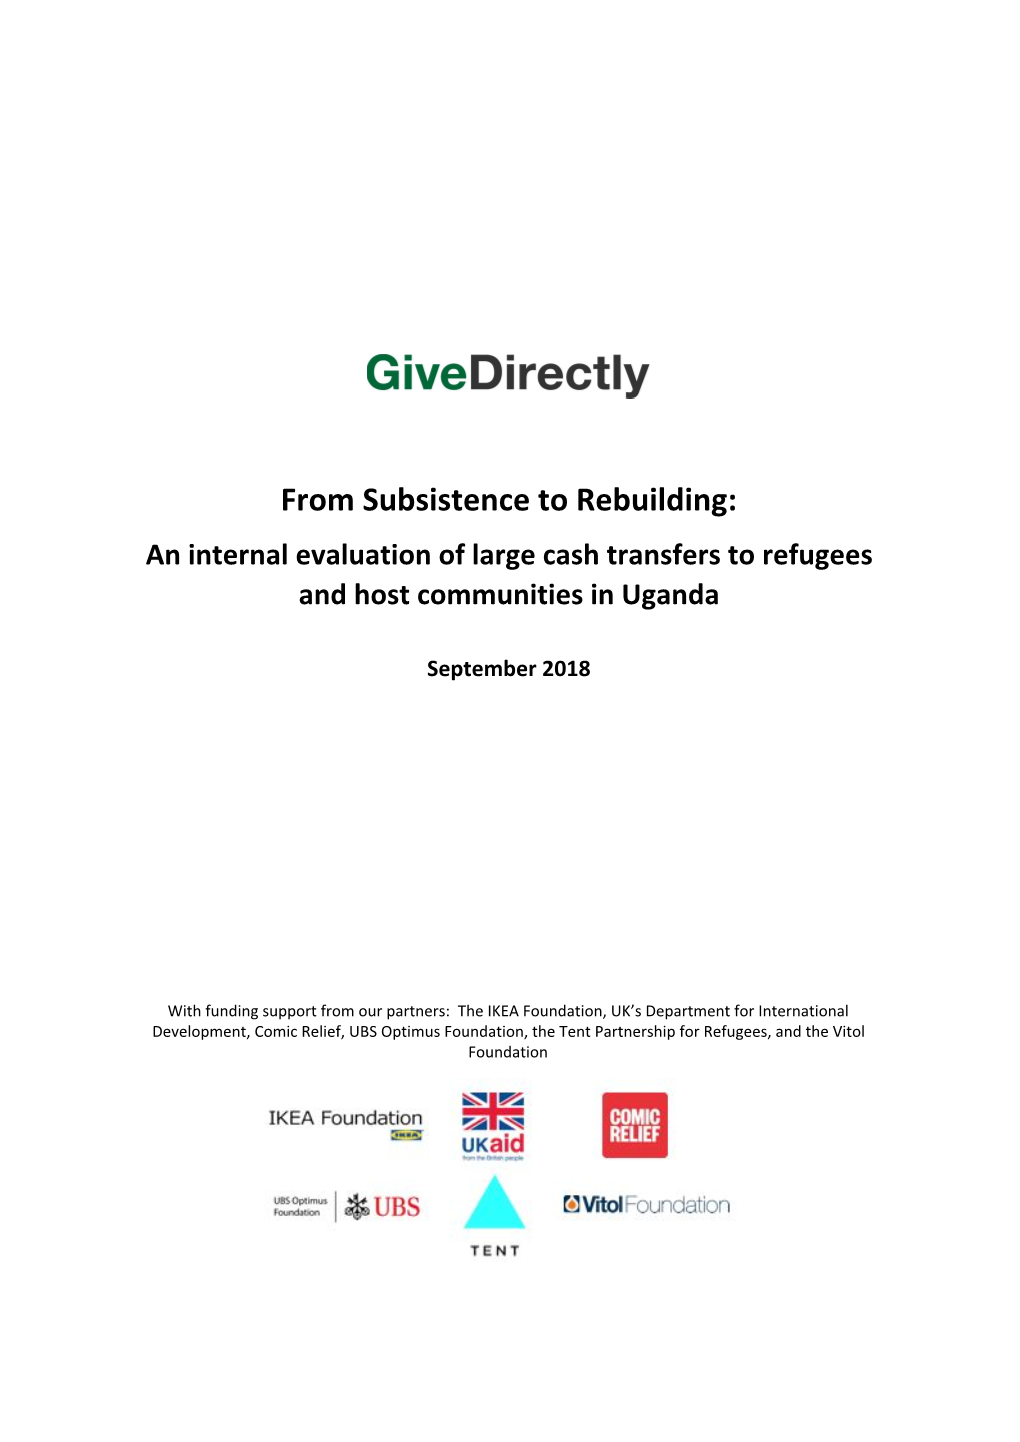 From Subsistence to Rebuilding: an Internal Evaluation of Large Cash Transfers to Refugees and Host Communities in Uganda